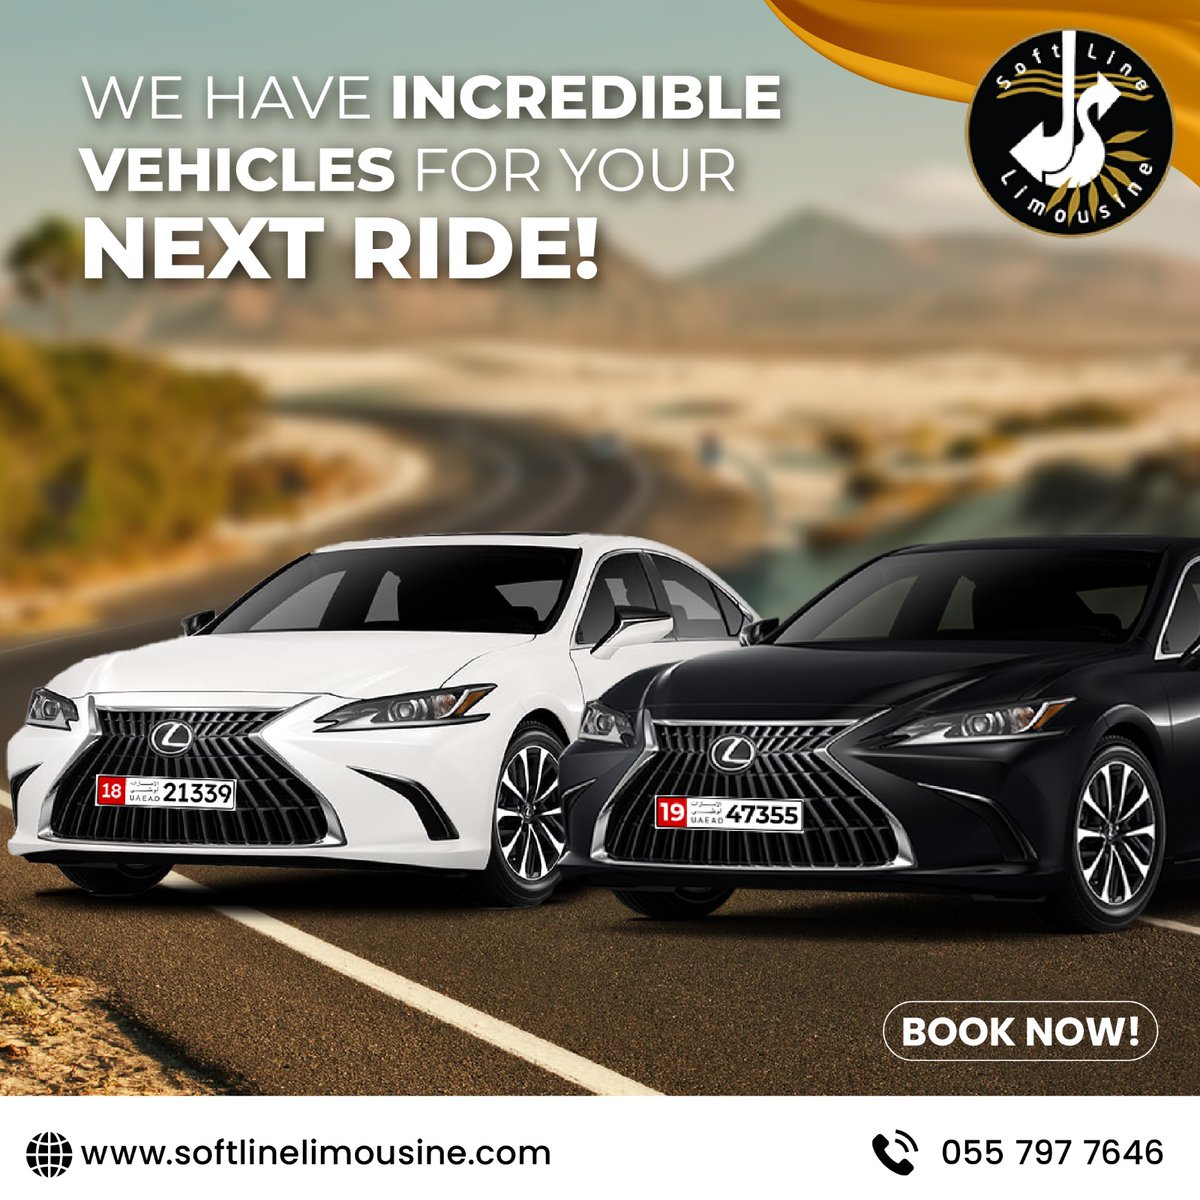 We have Incredible Vehicles for your Next Ride!

Call us🤙: +971 050 2370637, 055 7977646 (WhatsApp) 👇👇
Book your ride now at softlinelimousine.com/our-fleets.php

#nextride #taxiservices #airort #journey #professonaldrivers #airporttaxi #24x7 #limousineservice #airporttransfer